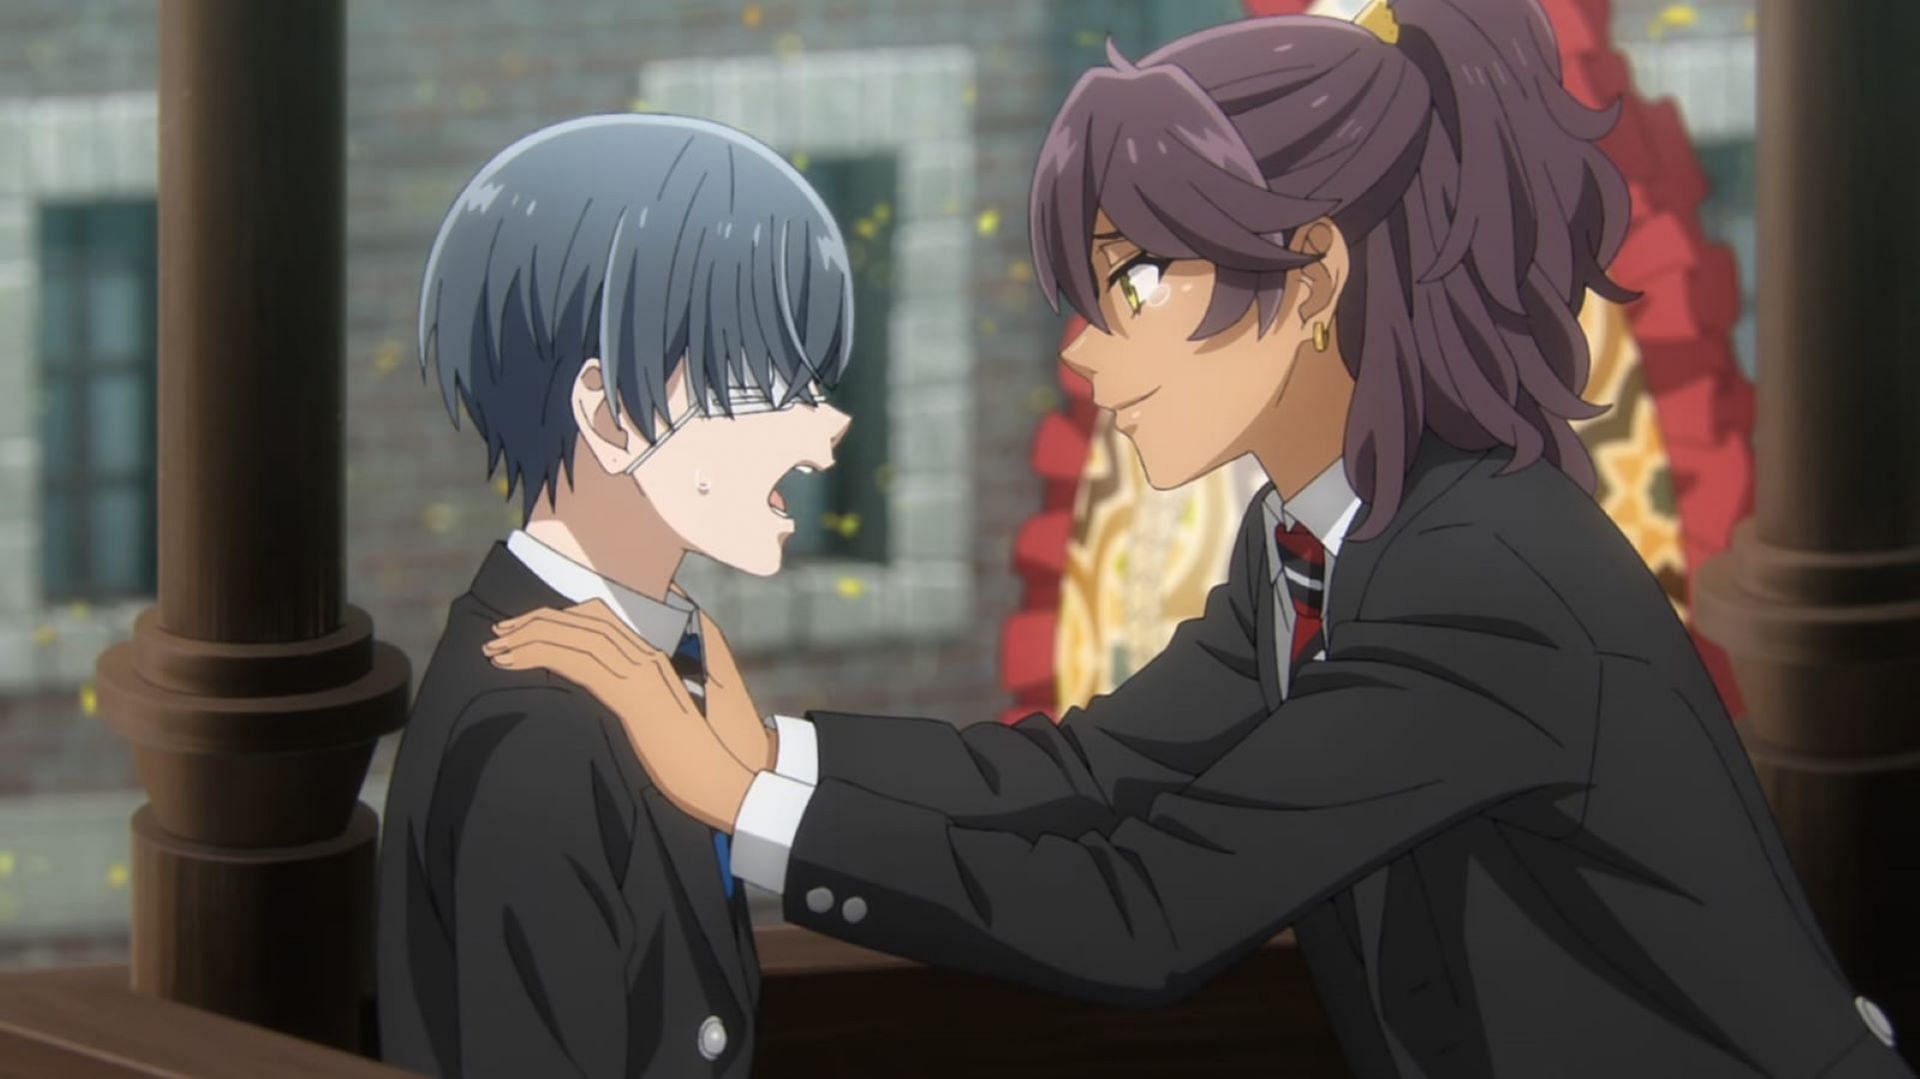 Ciel and Soma, as seen in the episode (Image via Cloverworks)